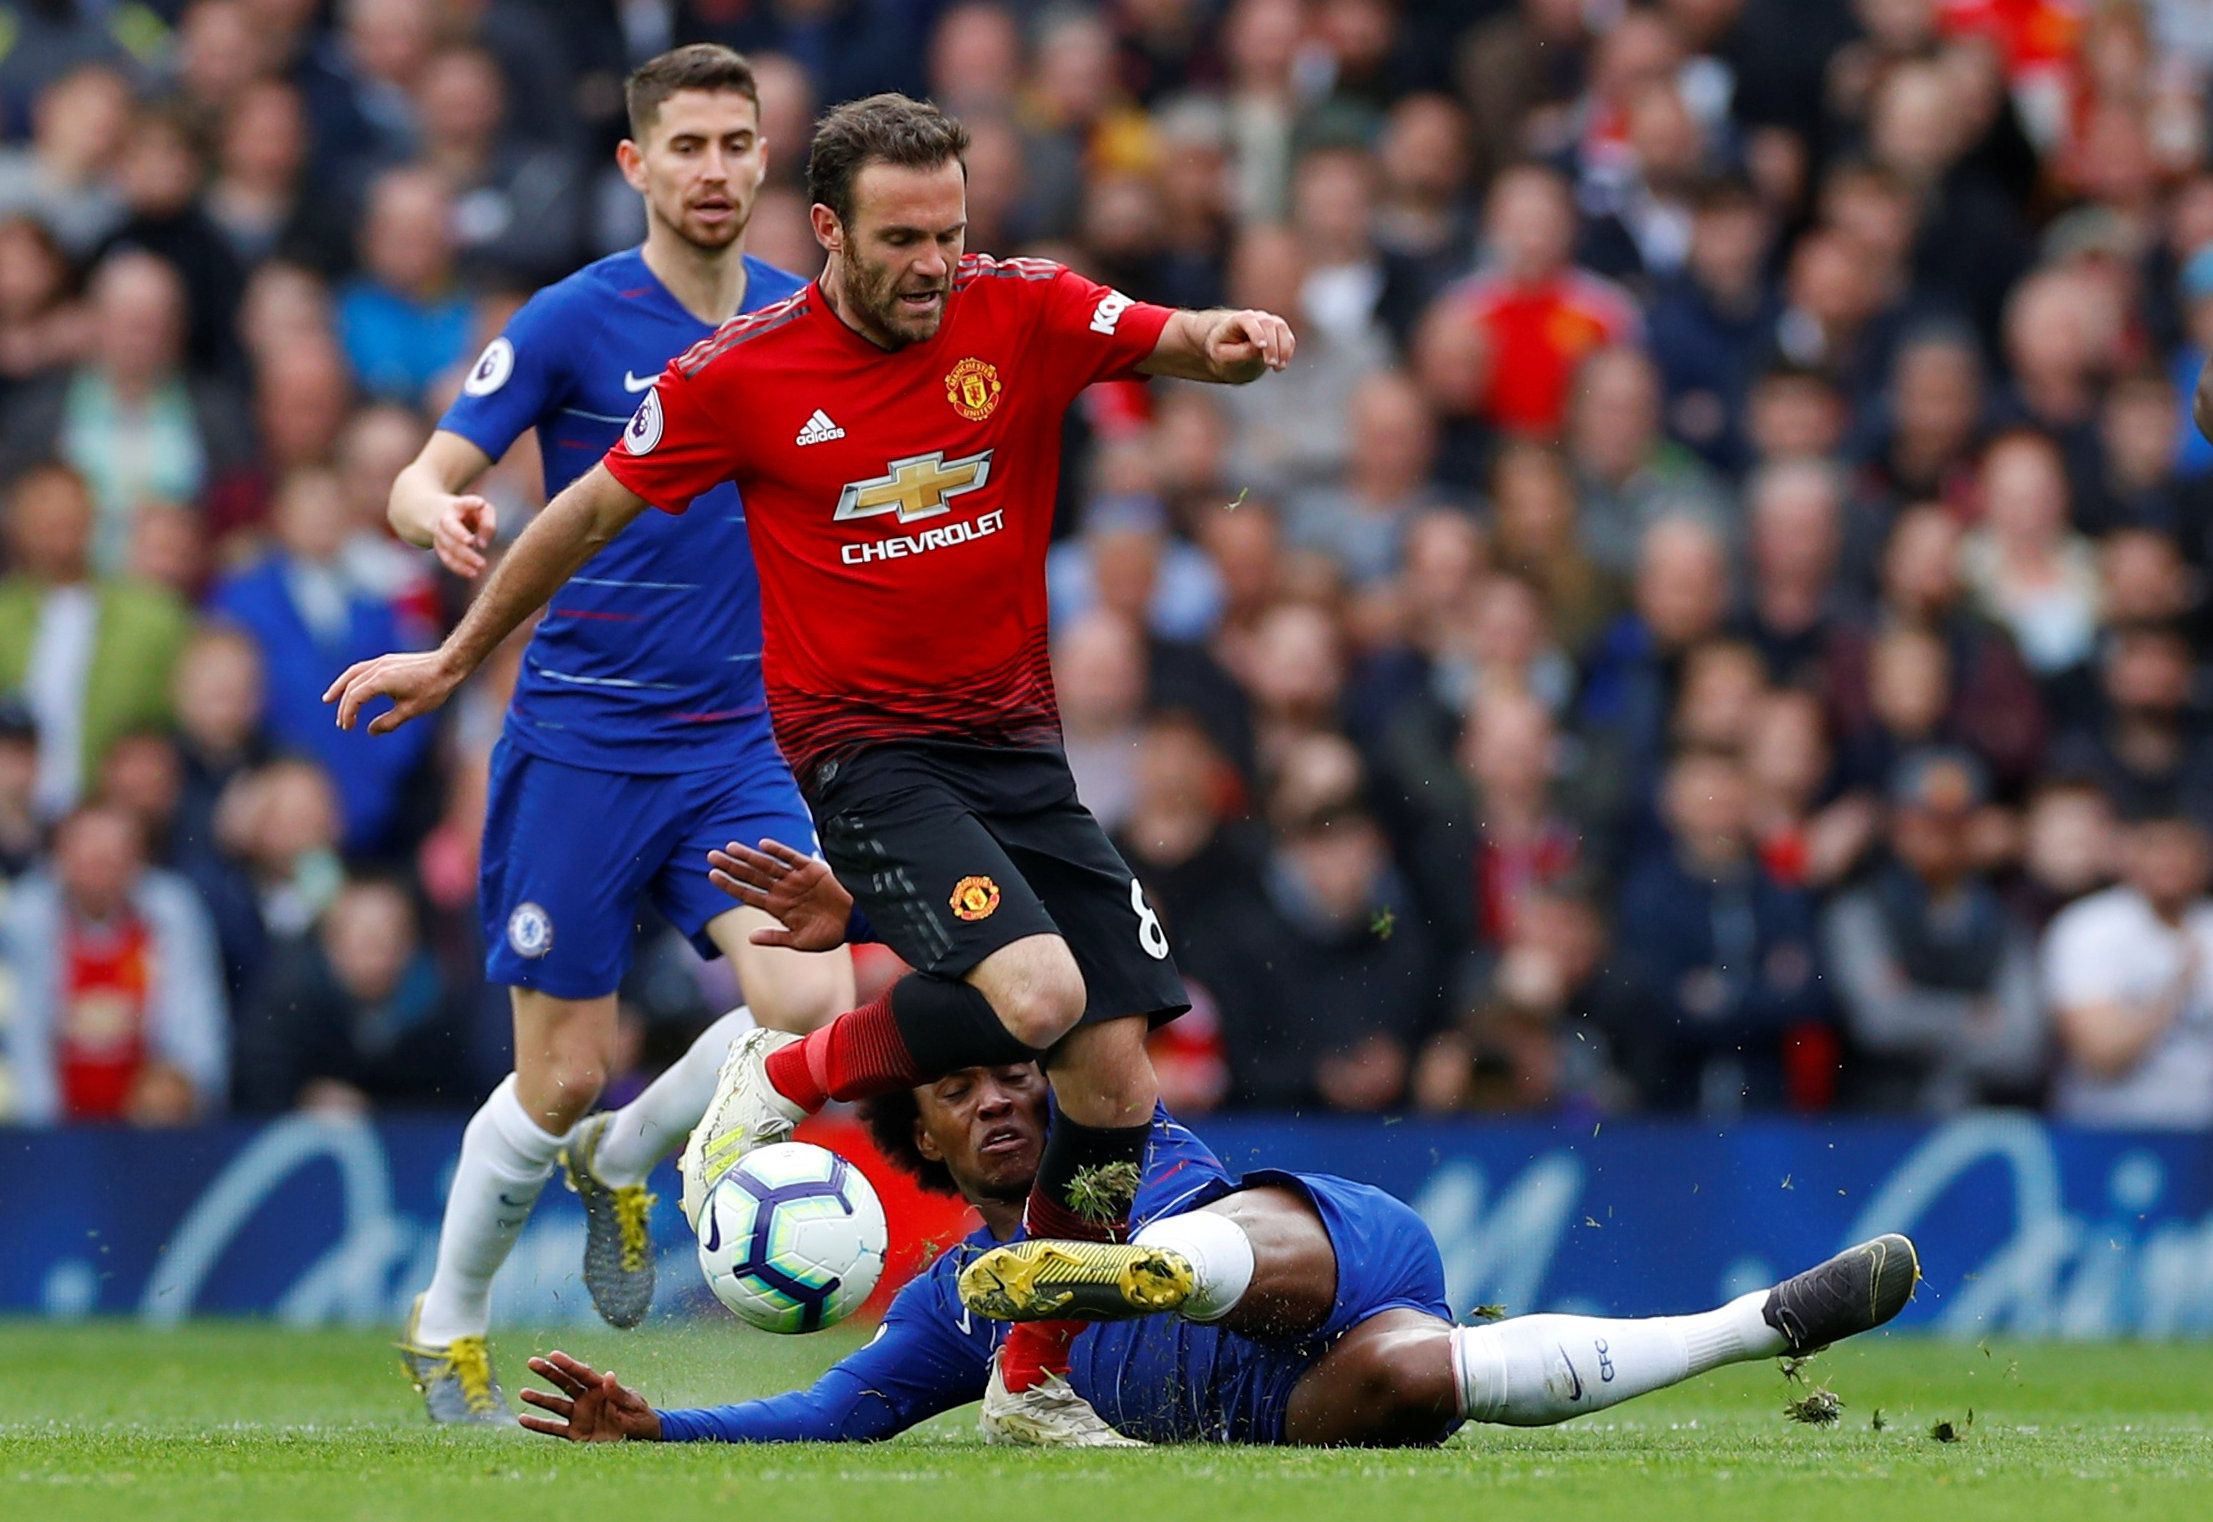 Soccer Football - Premier League - Manchester United v Chelsea - Old Trafford, Manchester, Britain - April 28, 2019  Manchester United's Juan Mata in action with Chelsea's Willian   REUTERS/Phil Noble  EDITORIAL USE ONLY. No use with unauthorized audio, video, data, fixture lists, club/league logos or "live" services. Online in-match use limited to 75 images, no video emulation. No use in betting, games or single club/league/player publications.  Please contact your account representative for fu